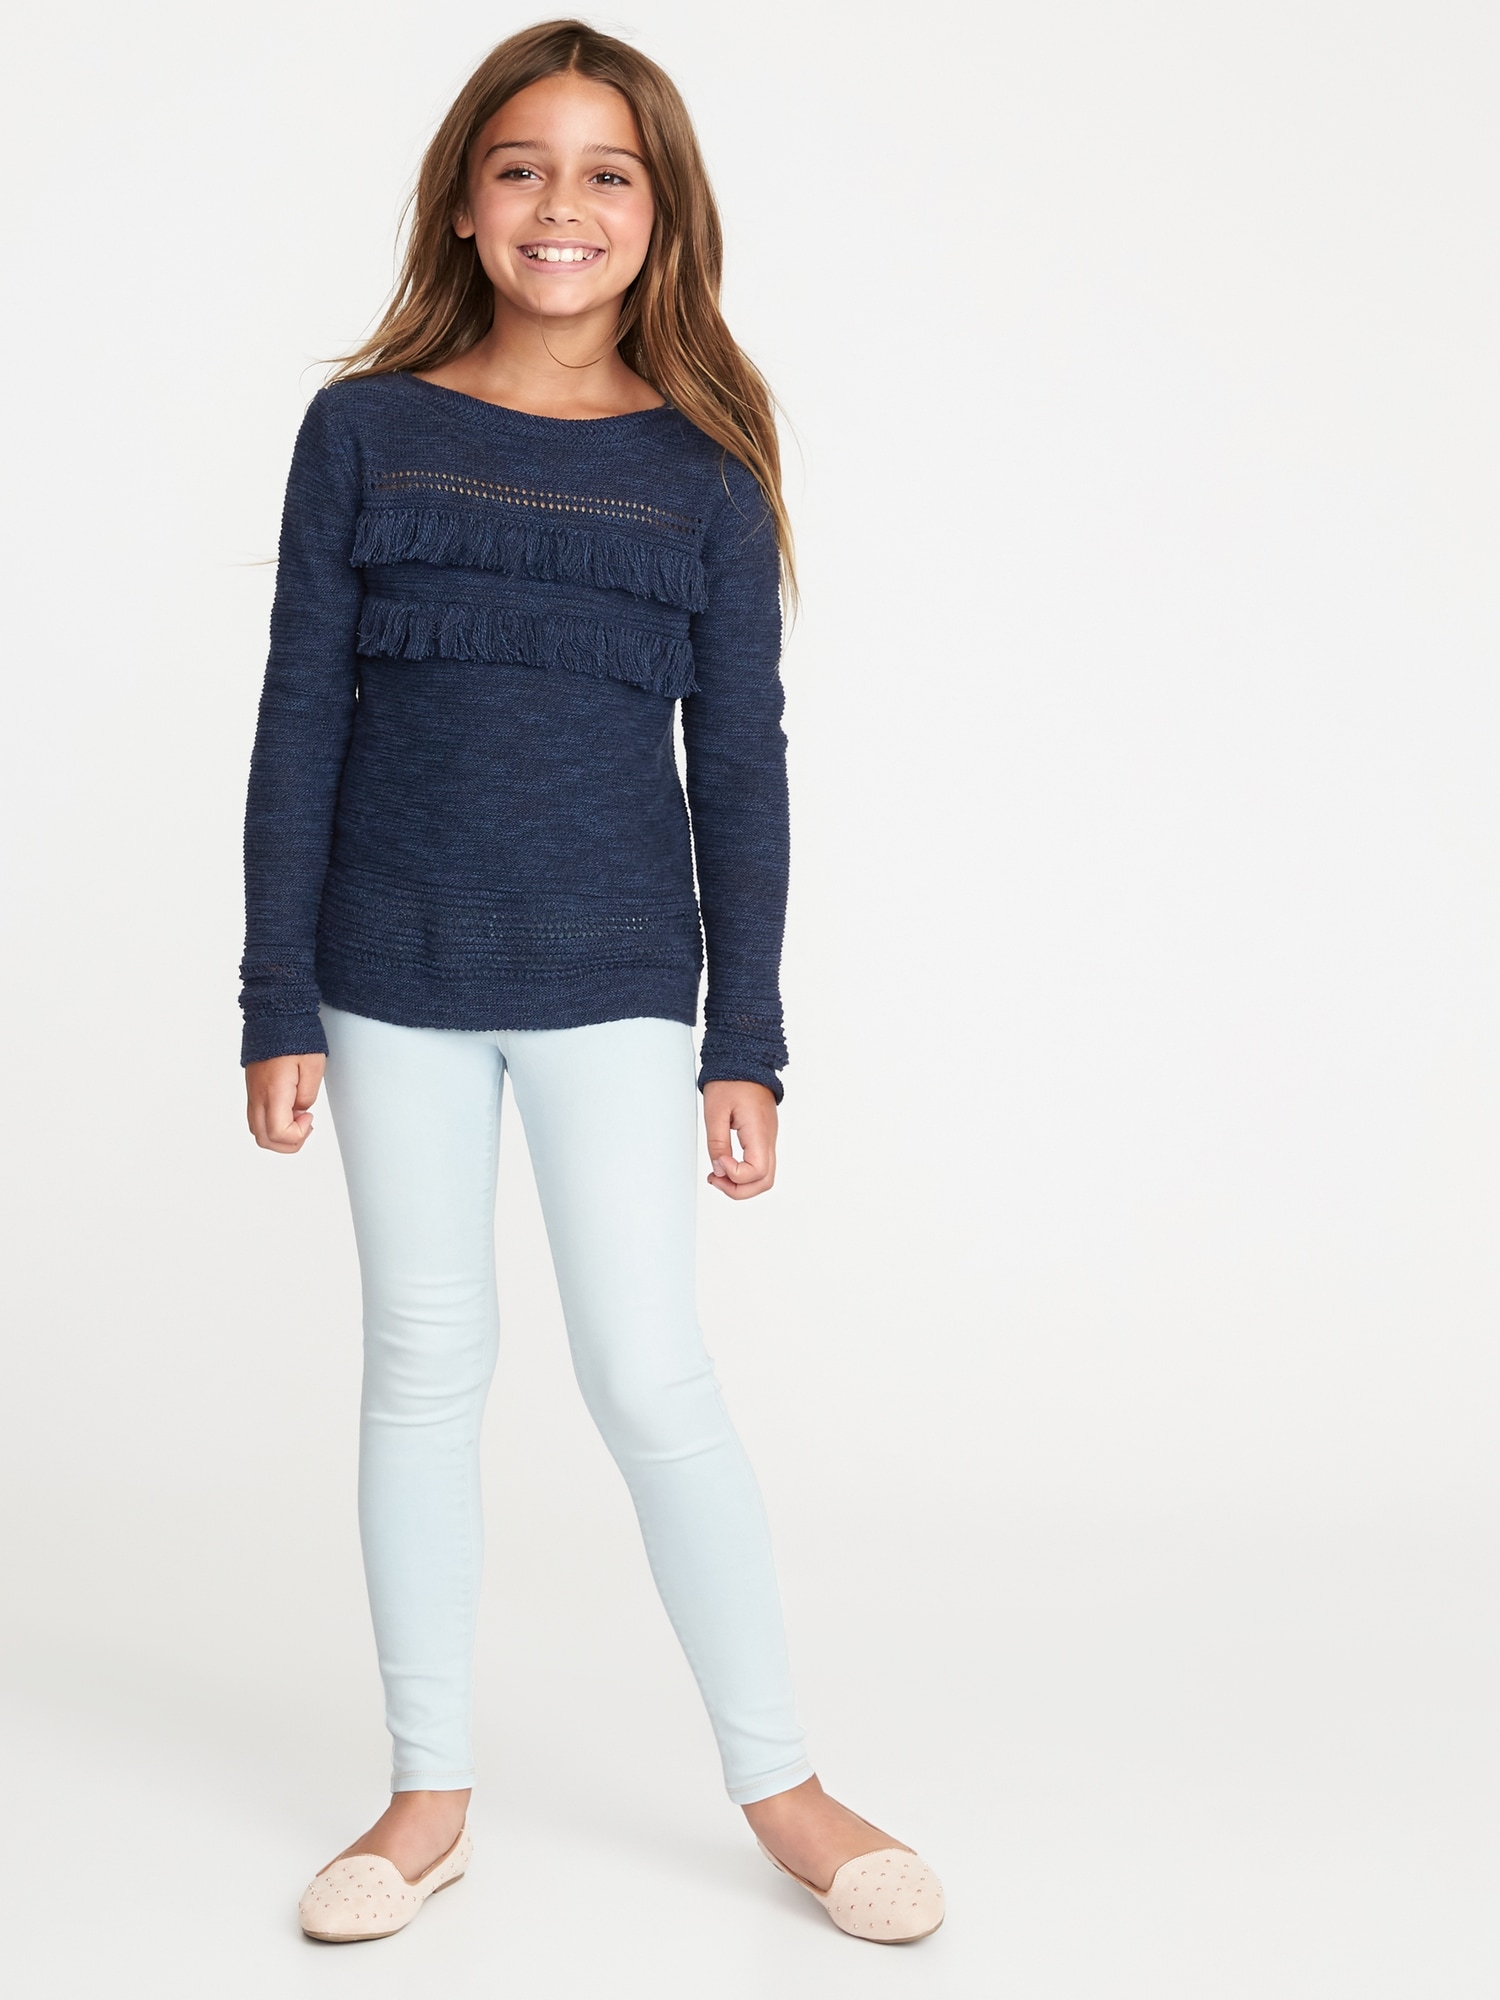 Tiered-Fringe Sweater for Girls | Old Navy